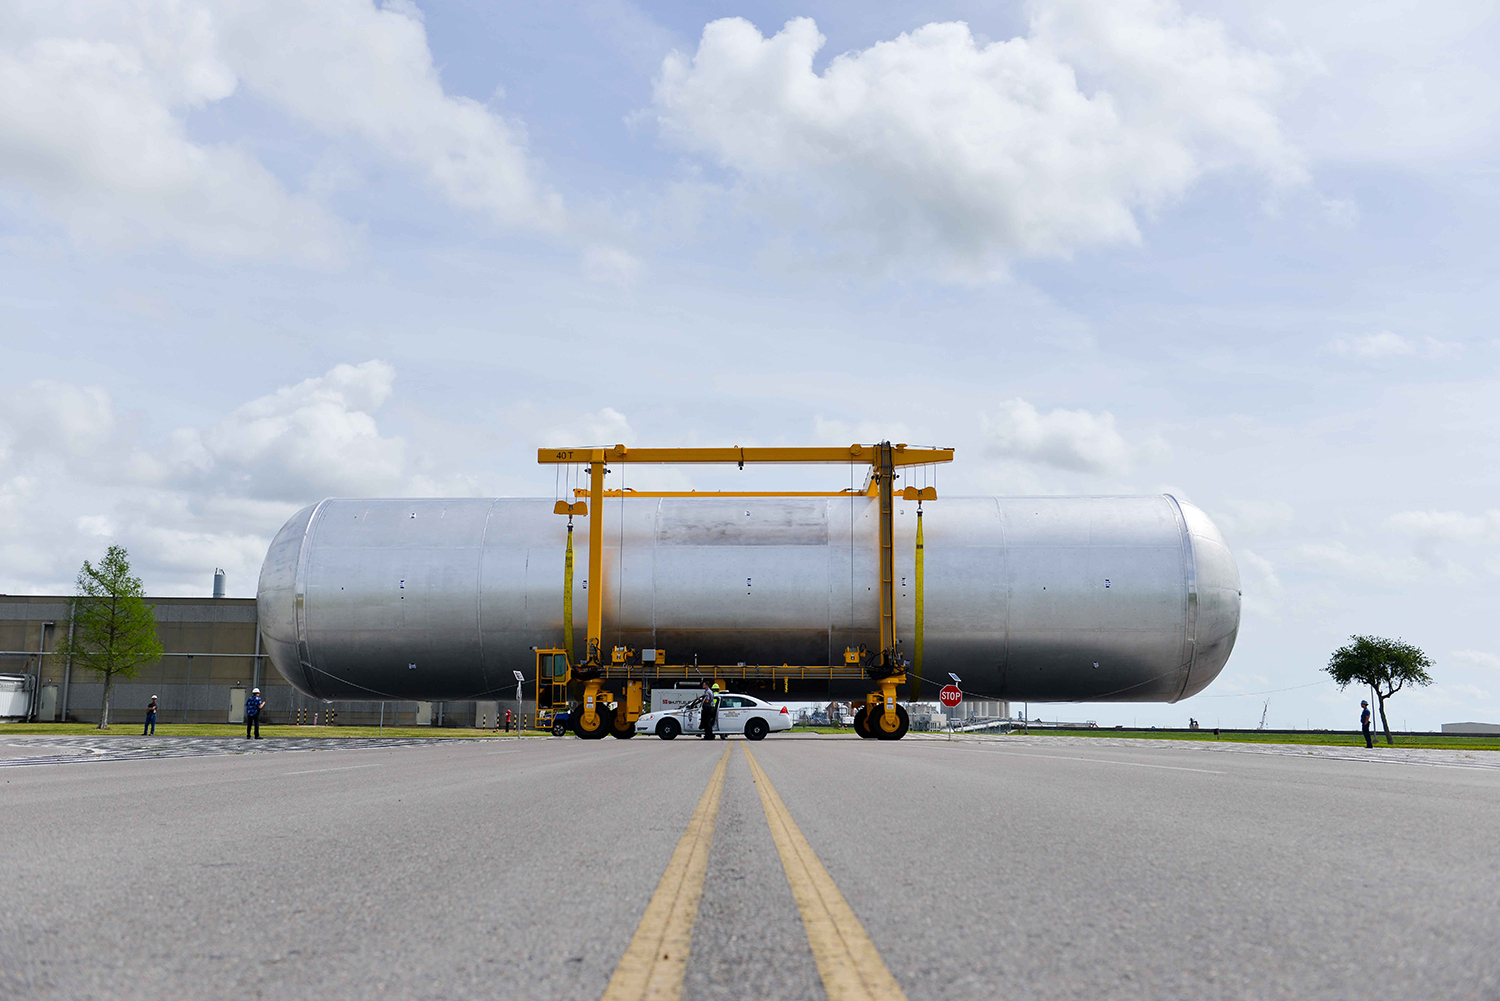 Moving the SLS Liquid Hydrogen Tank Structural Test Article